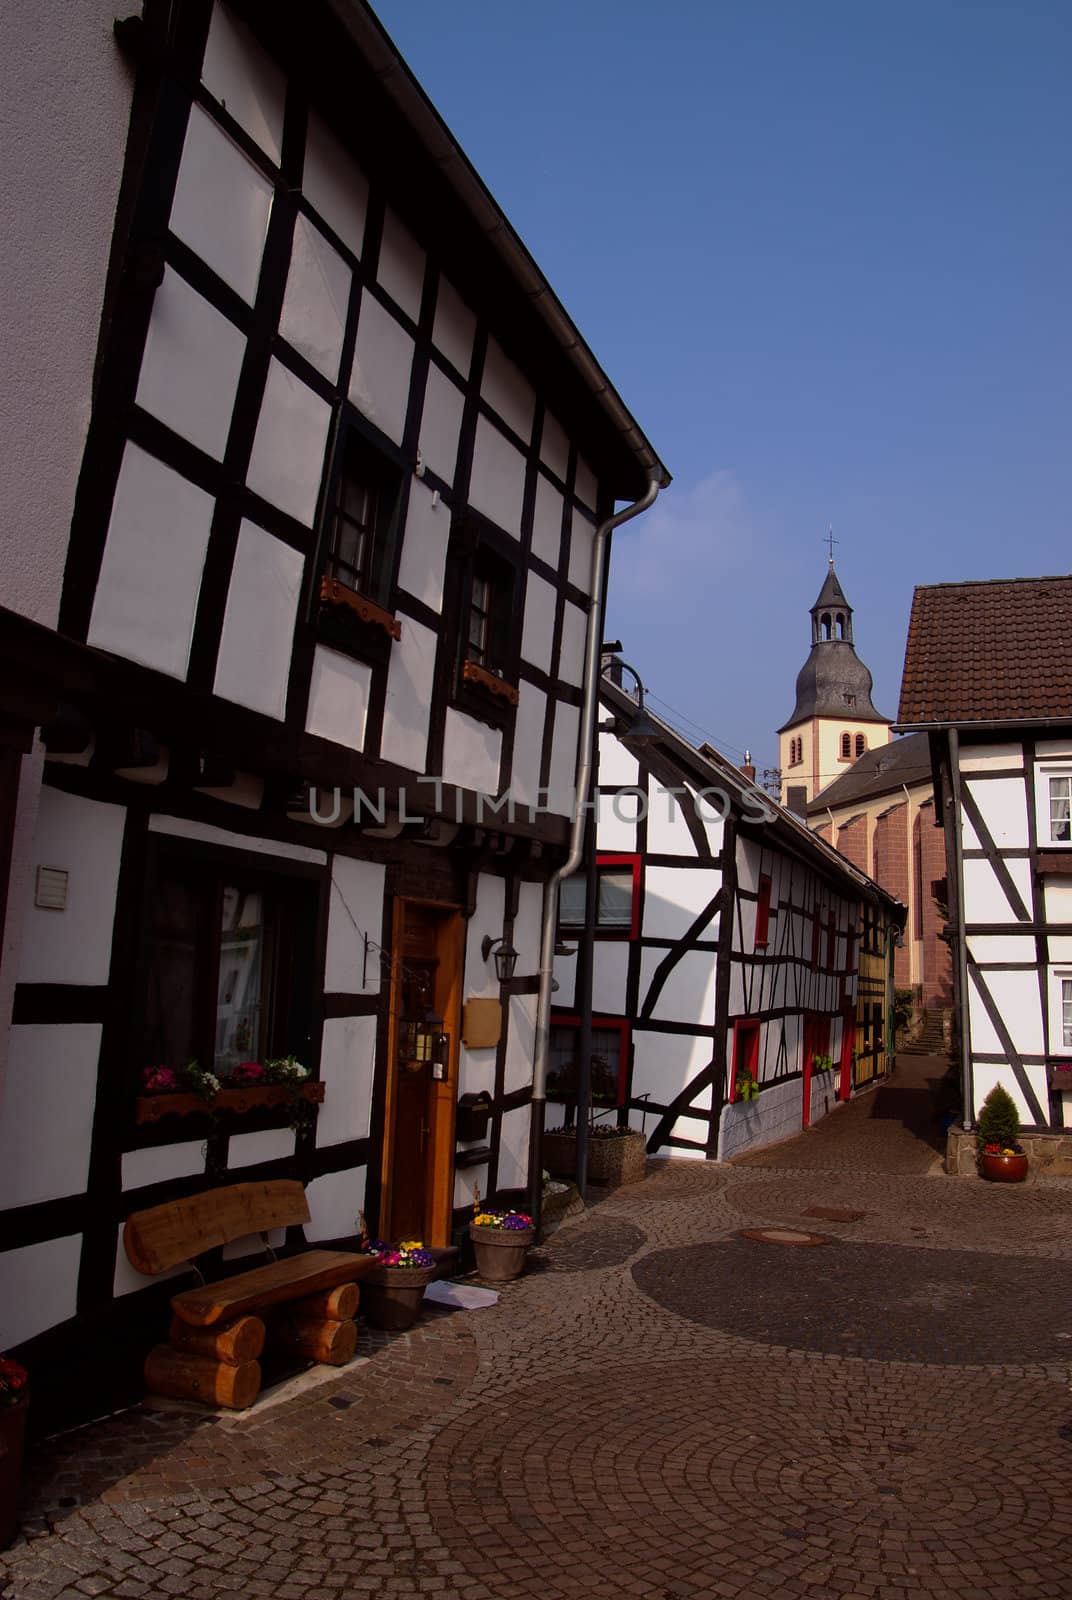 Traditional old house and church in town Heimbach, Germany